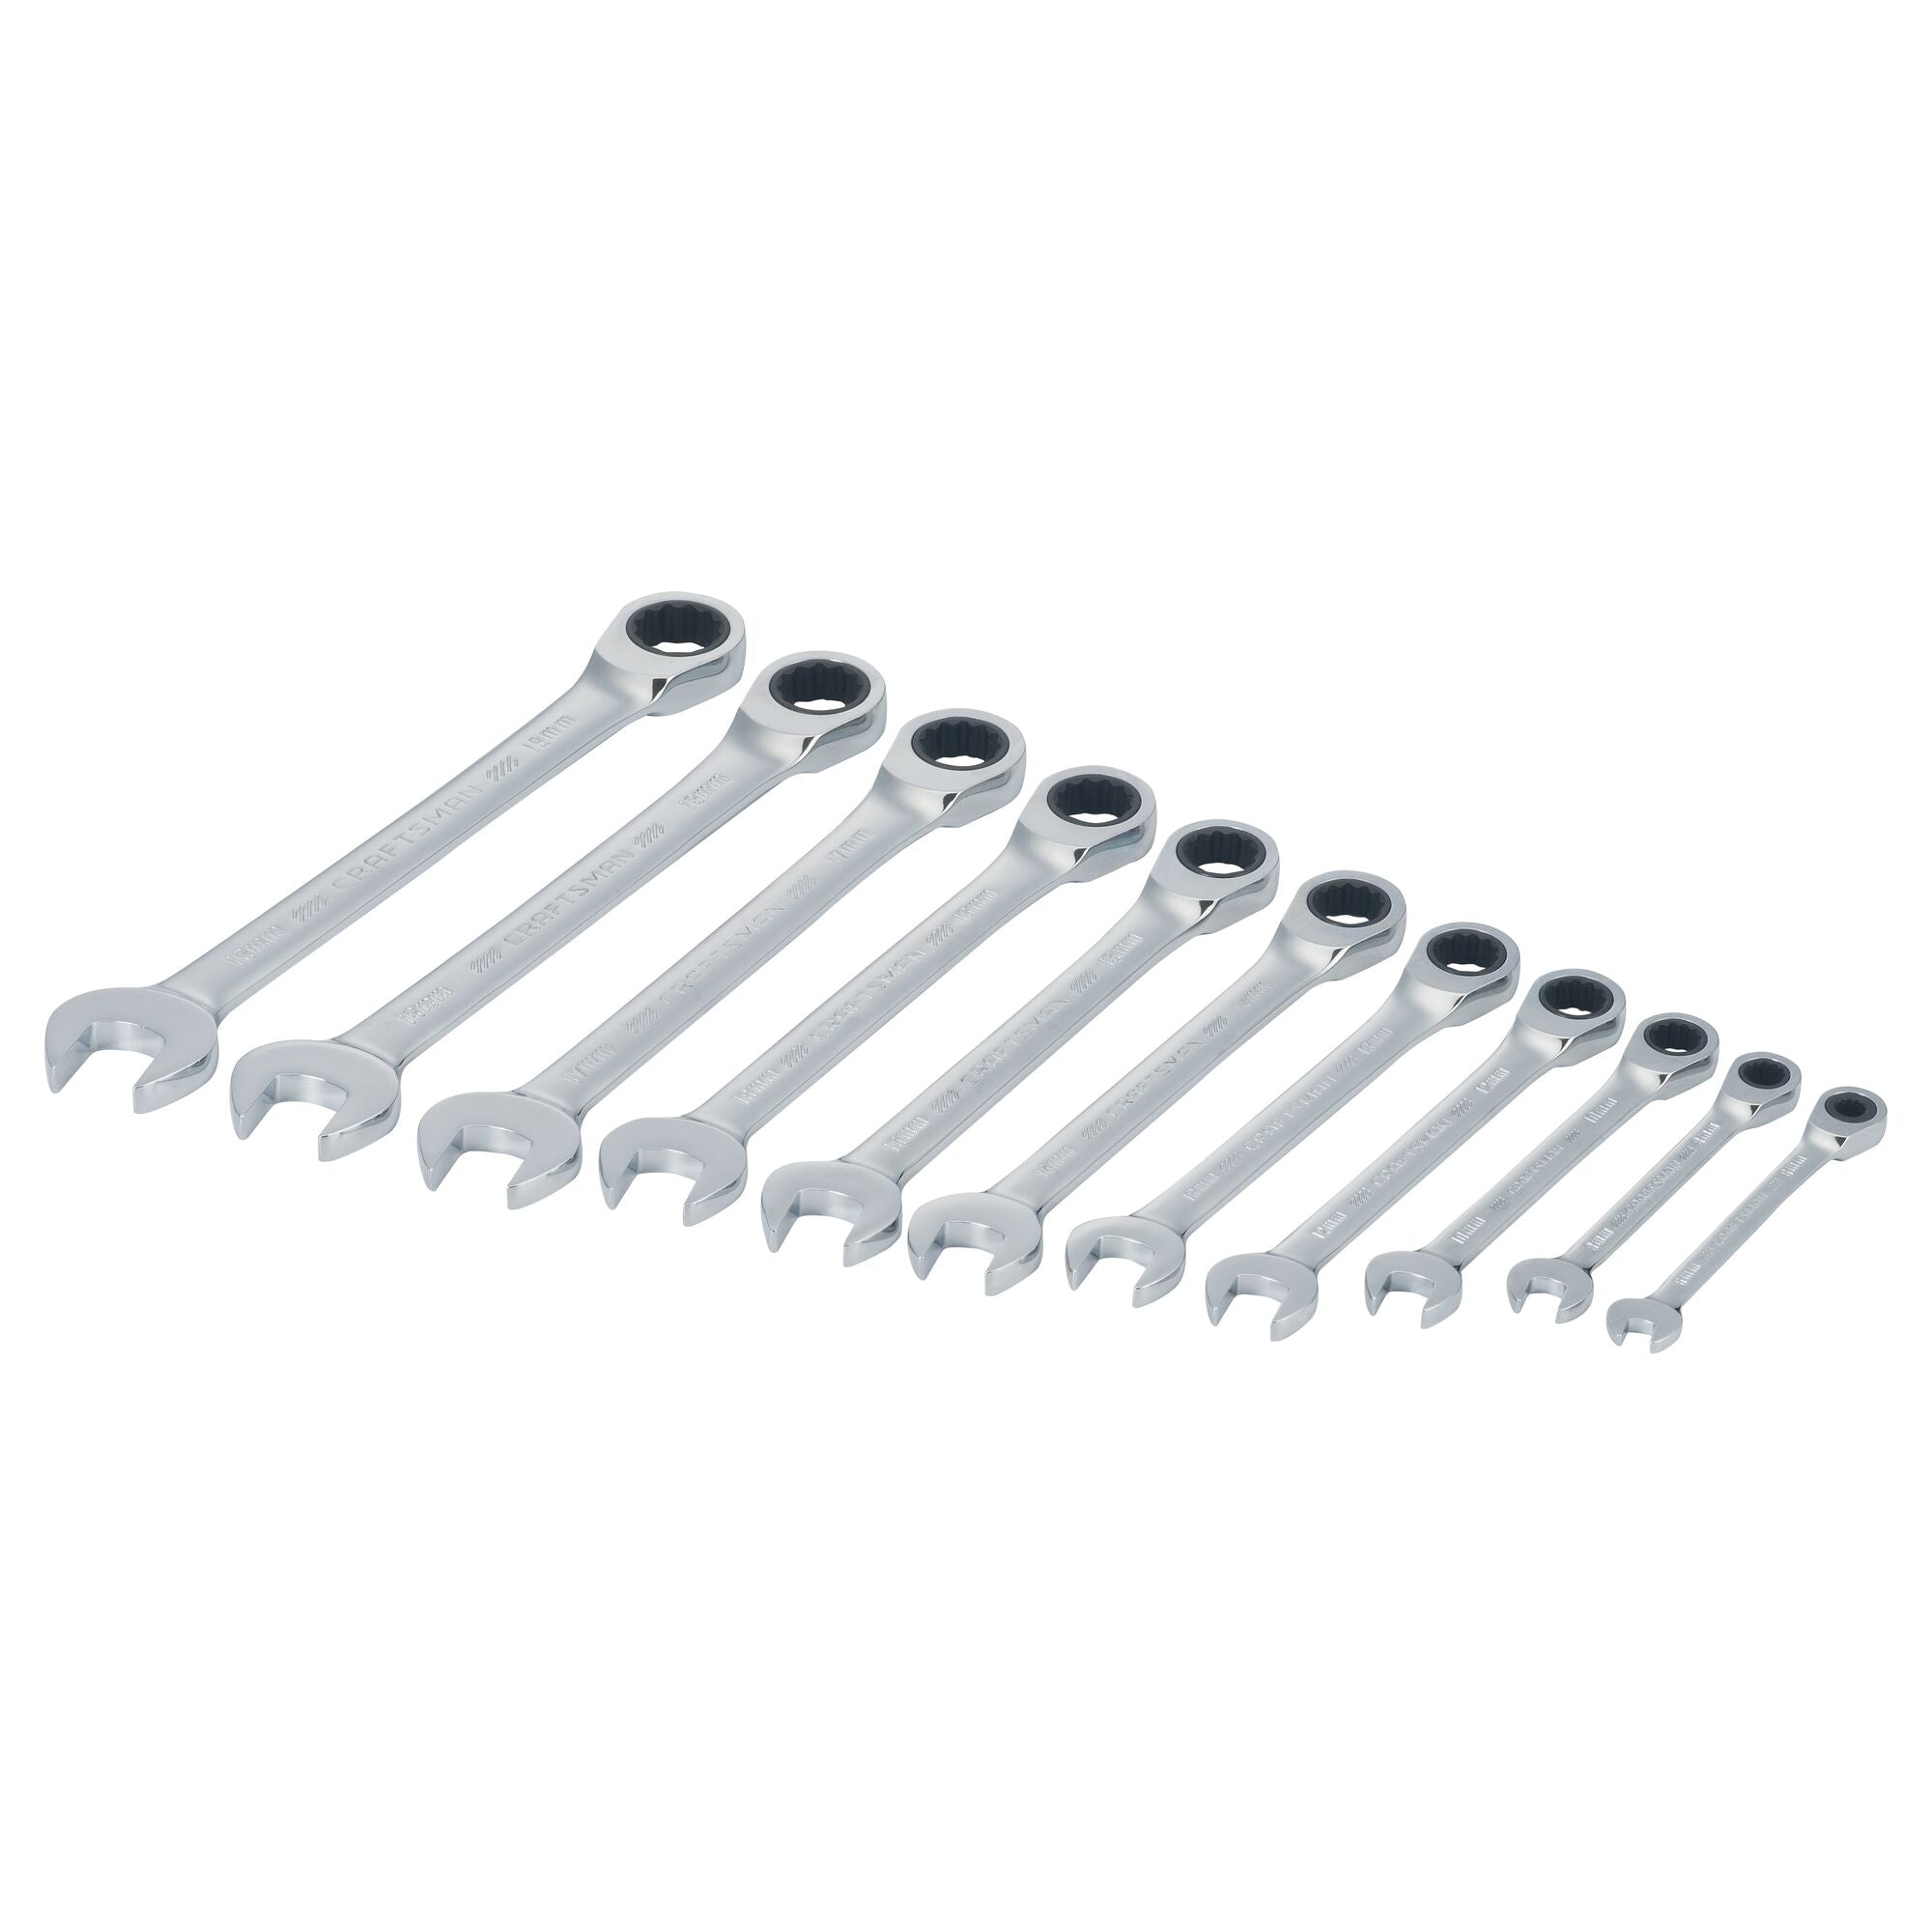 11 piece metric ratcheting combination wrench set at a workshop.